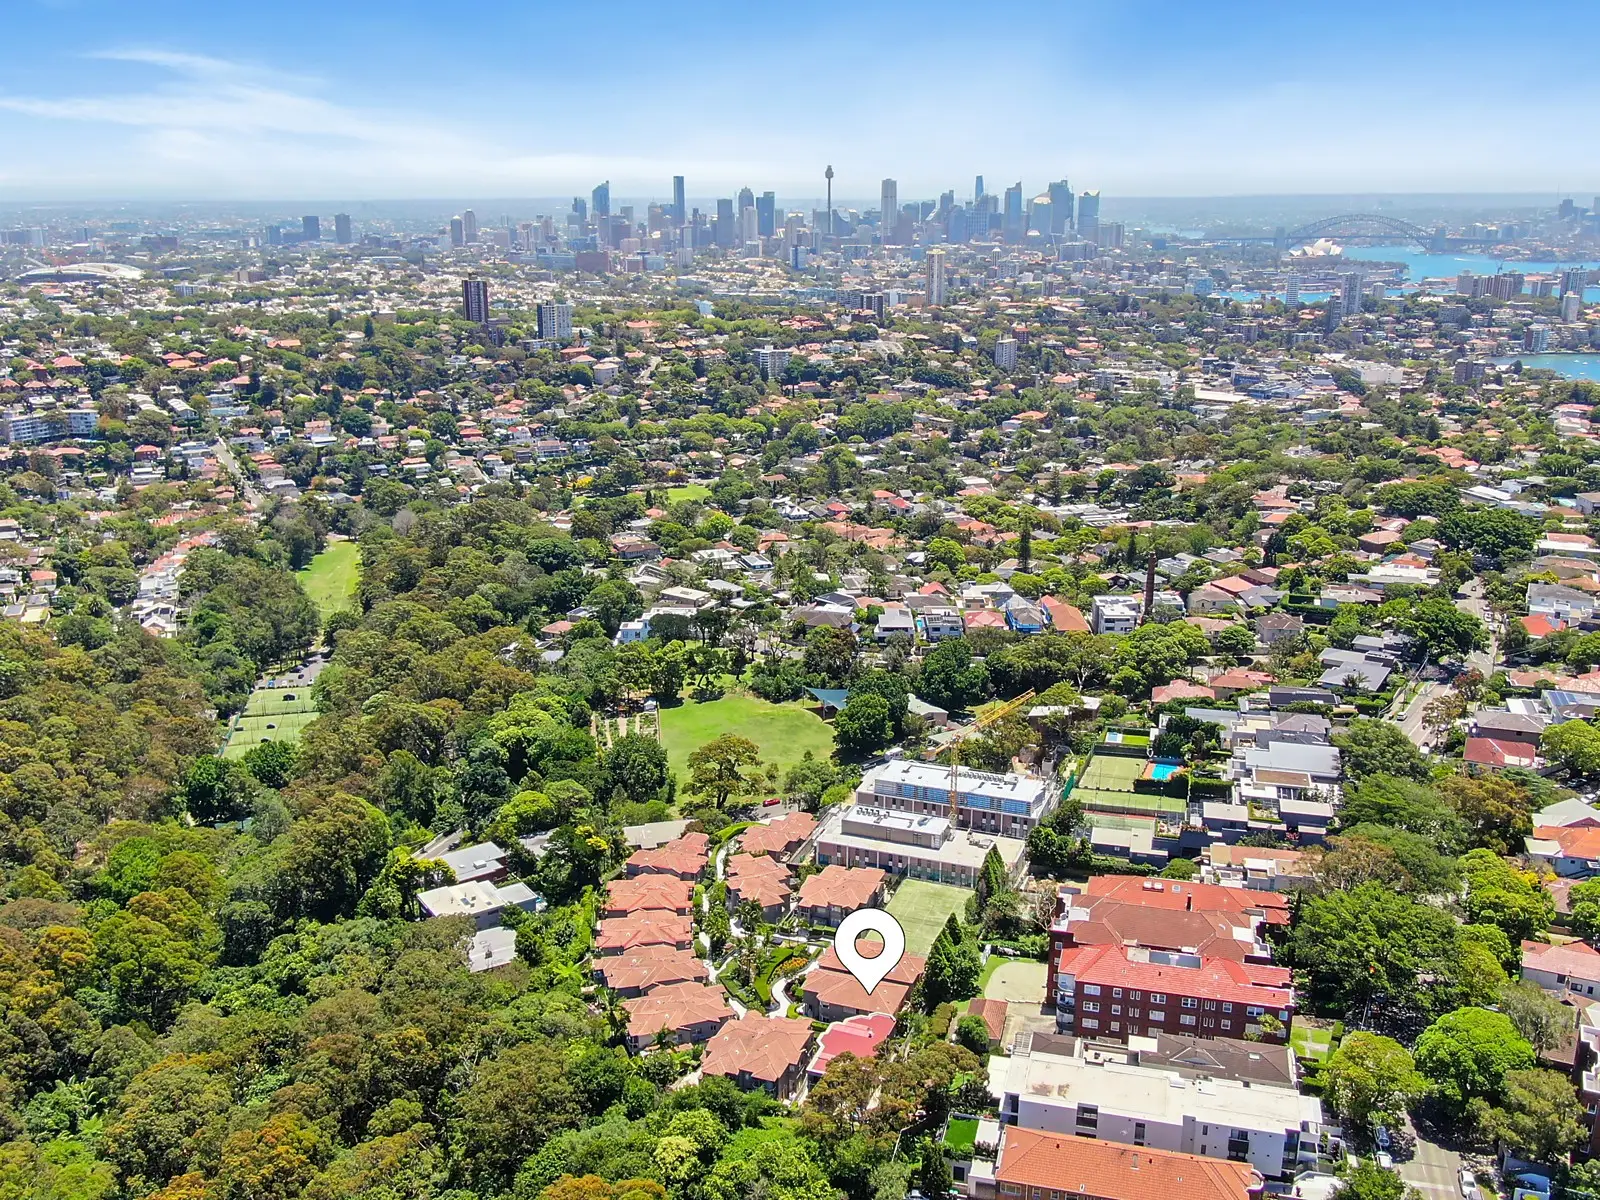 Photo #2: 22/17a Cooper Park Road, Bellevue Hill - Sold by Sydney Sotheby's International Realty